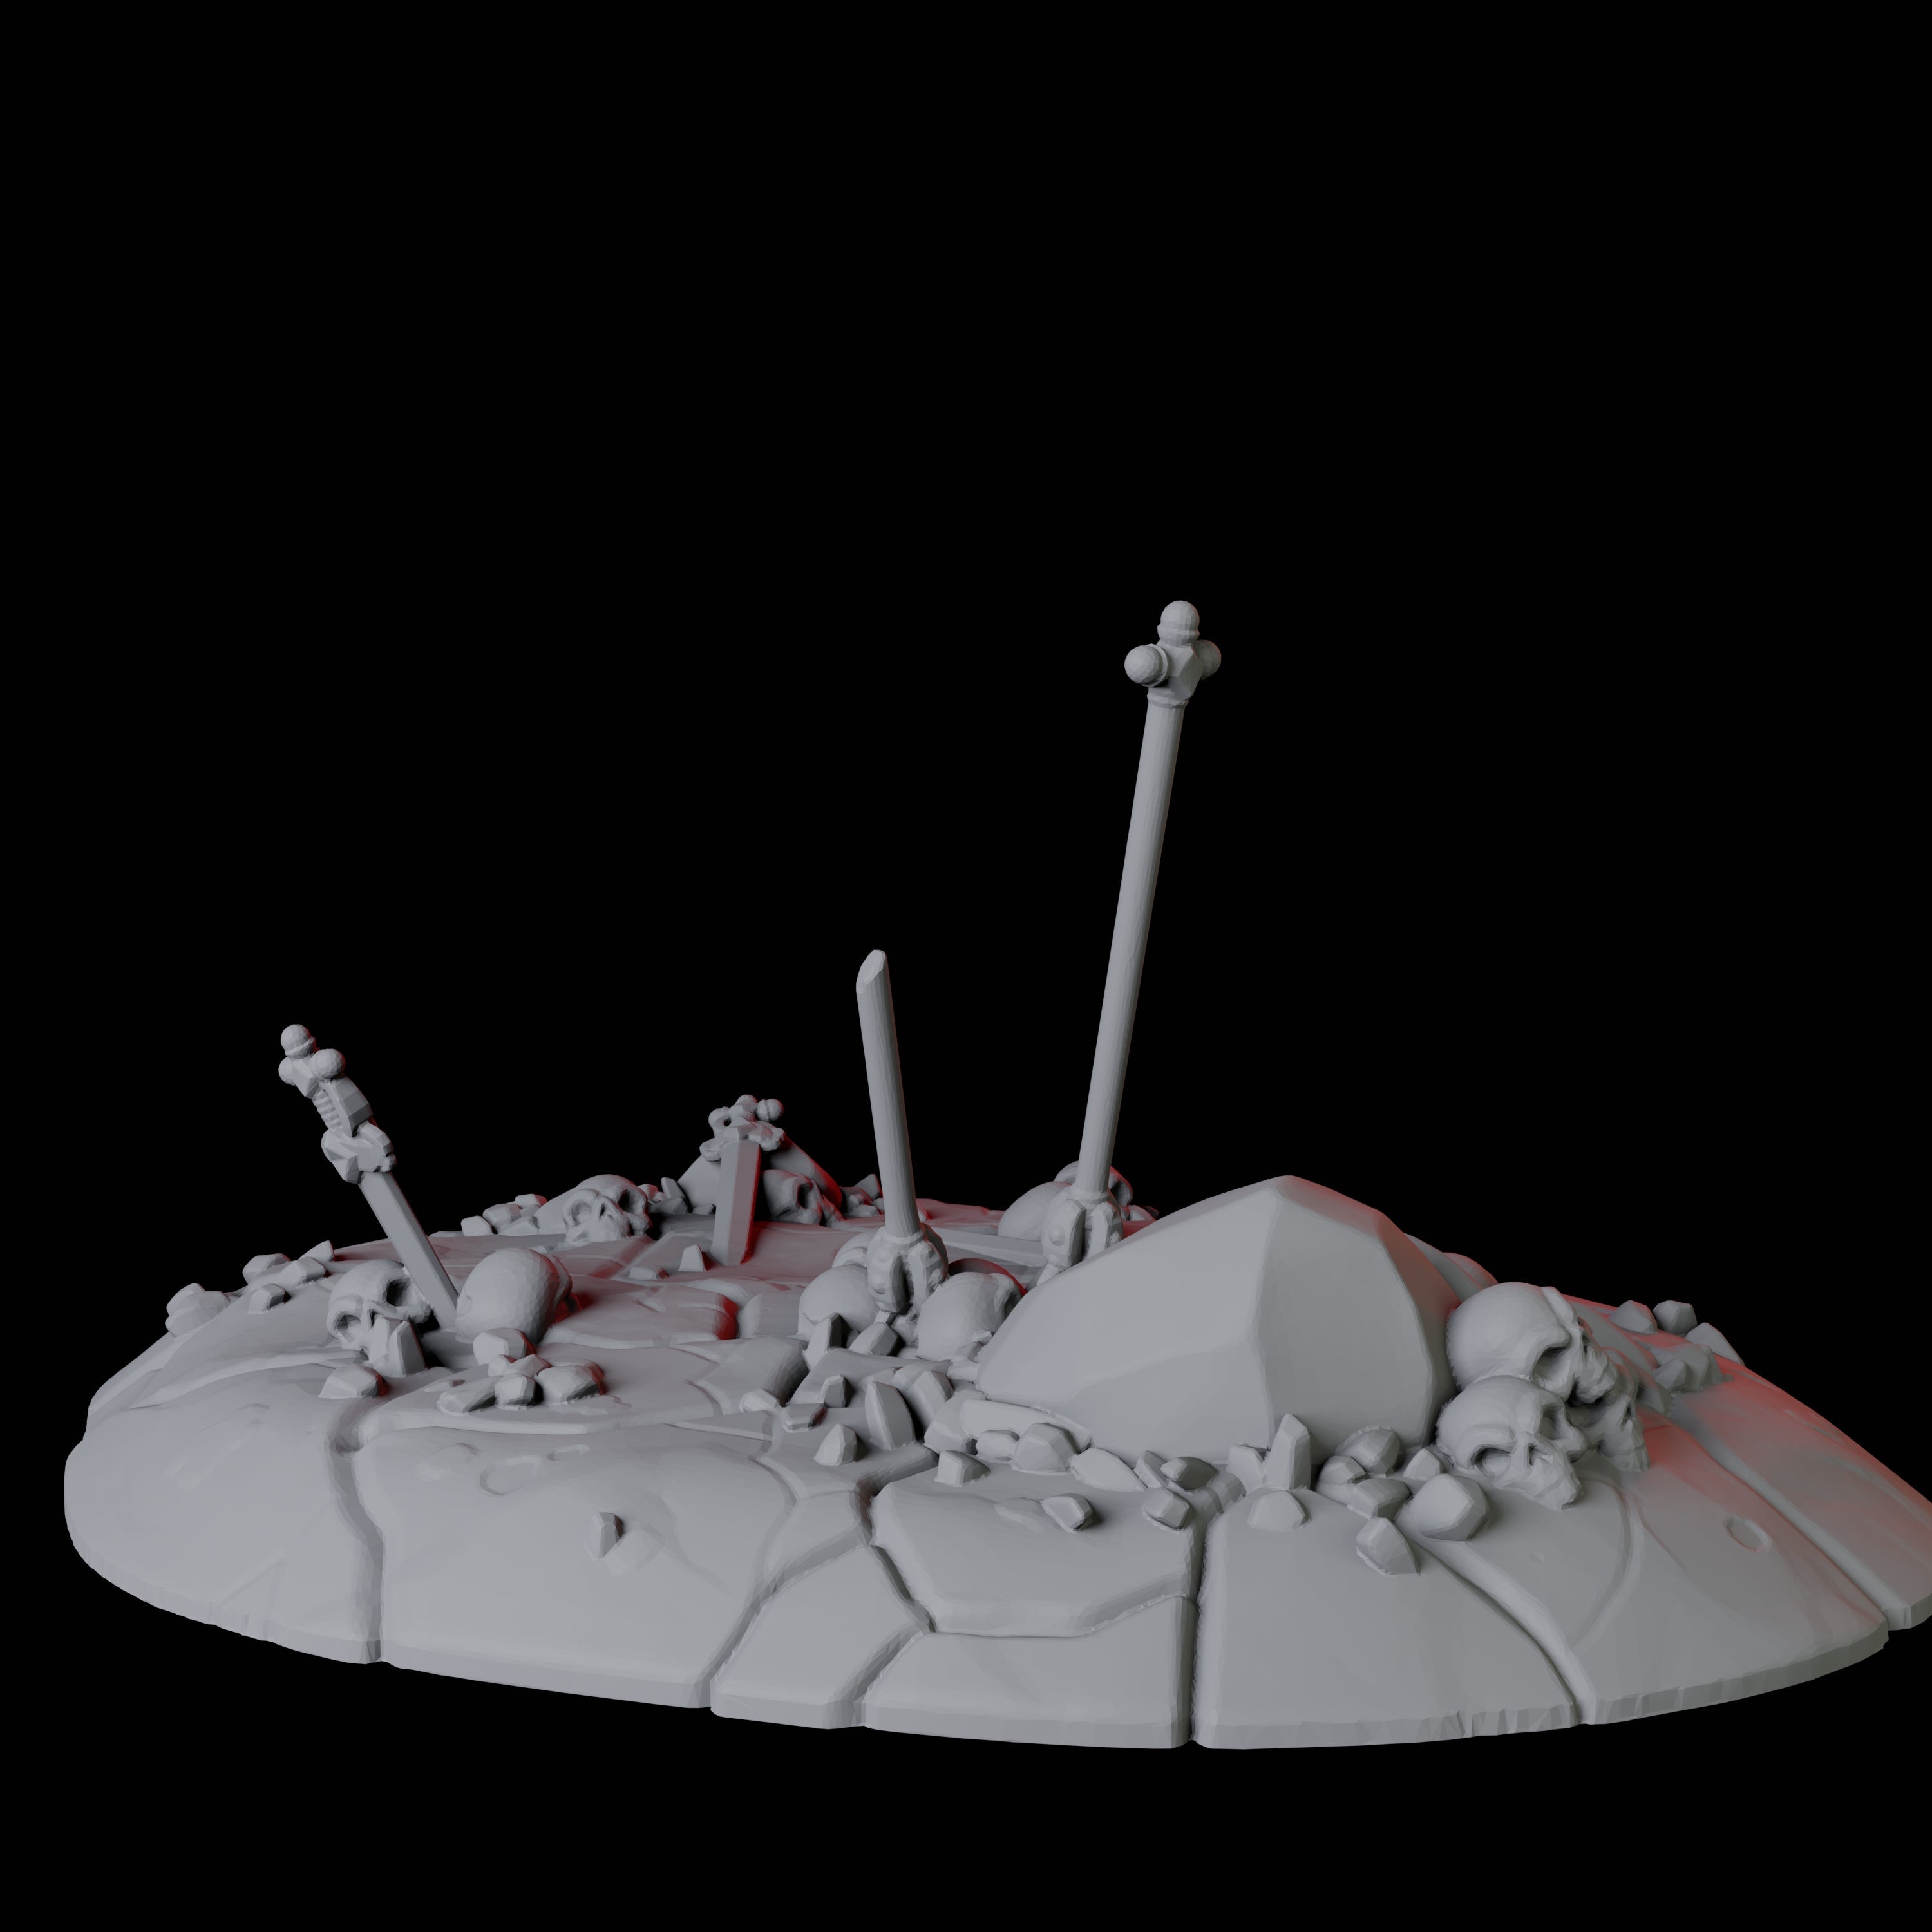 Hellscape Terrain Piece G Miniature for Dungeons and Dragons, Pathfinder or other TTRPGs